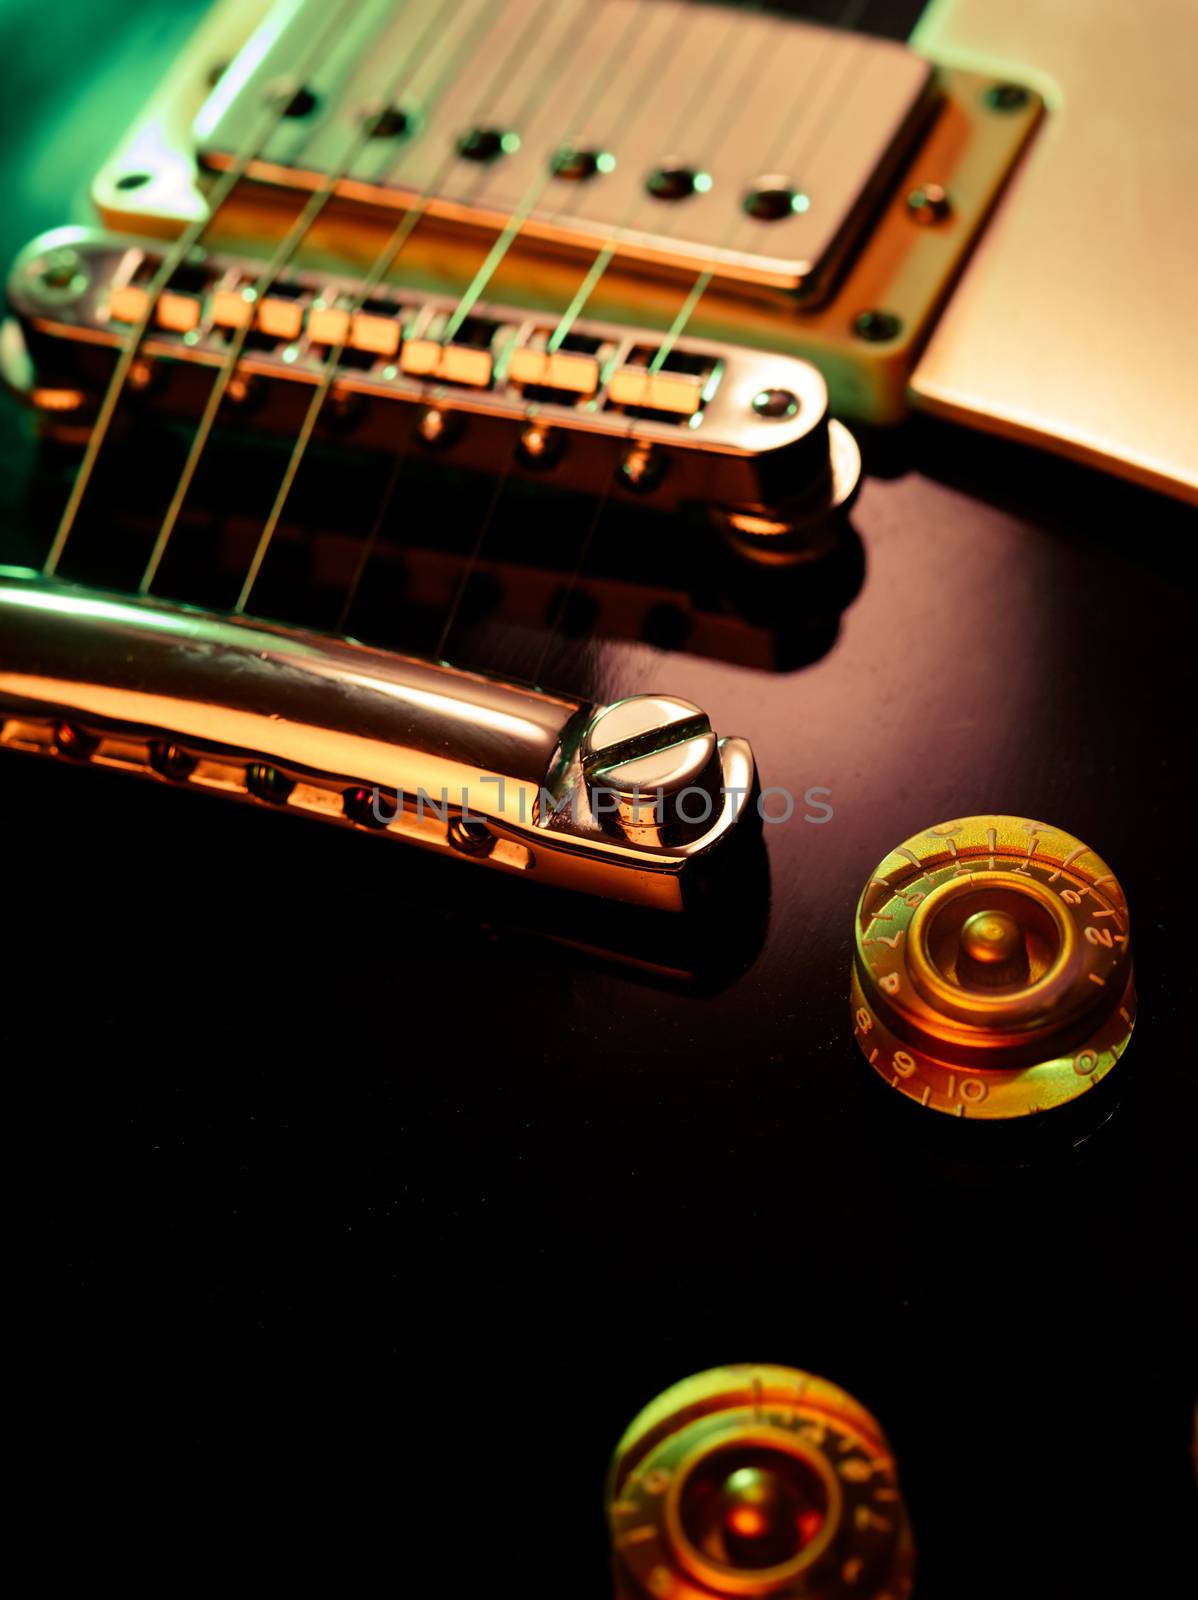 Electric guitar pickup and bridge by sumners